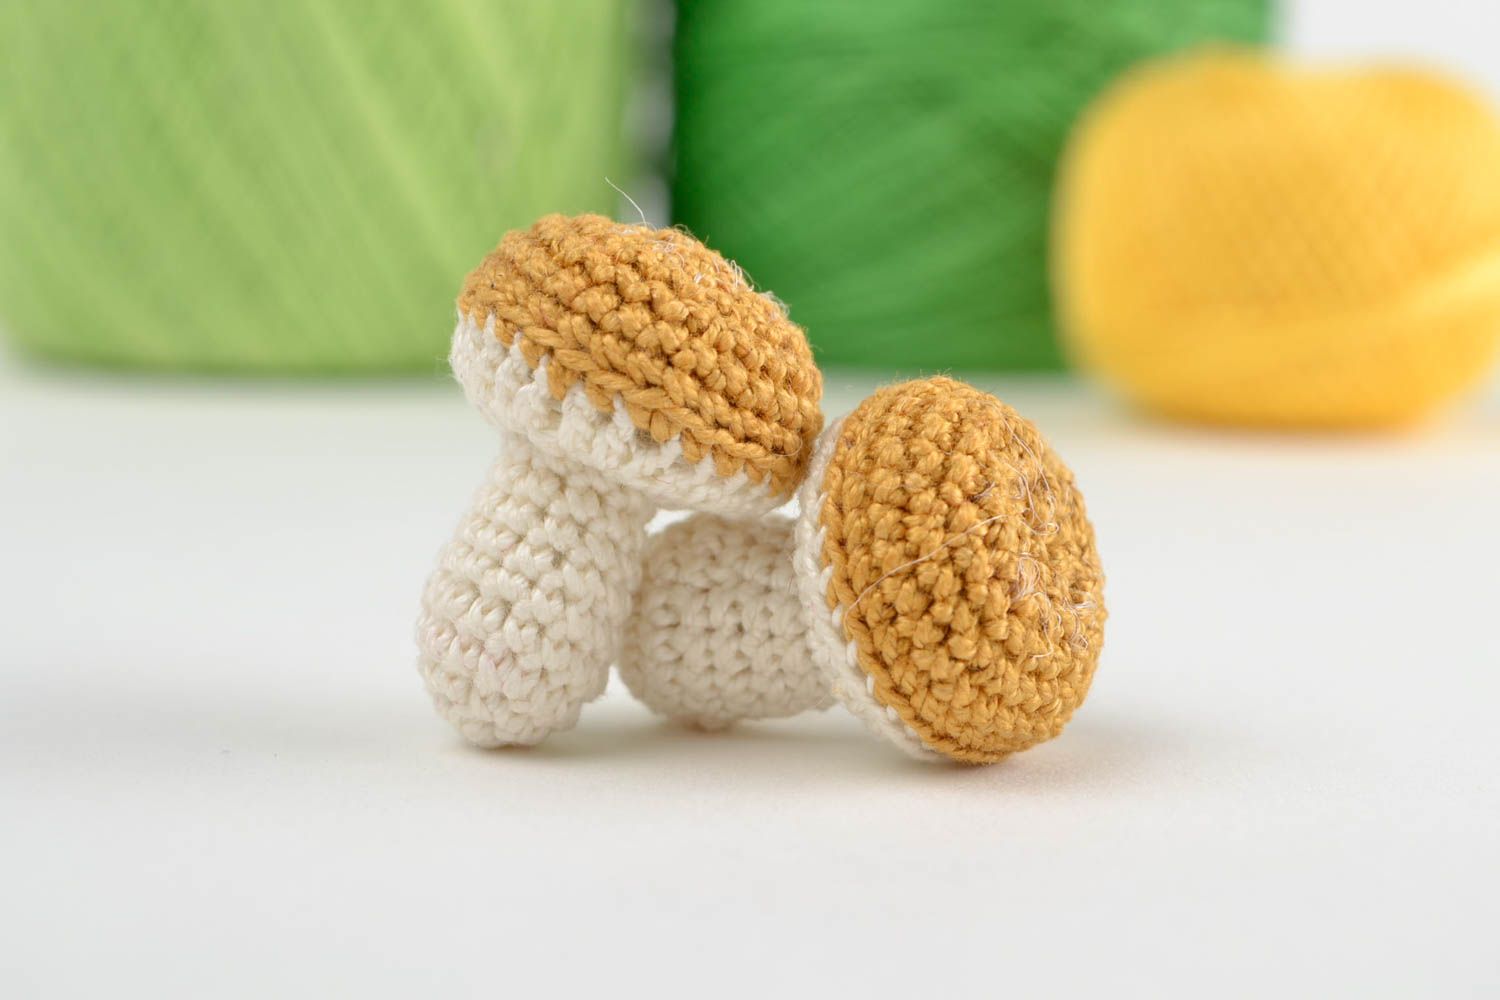 Handmade toys designer toy unusual toy set of 2 items gift ideas crocheted toy photo 1